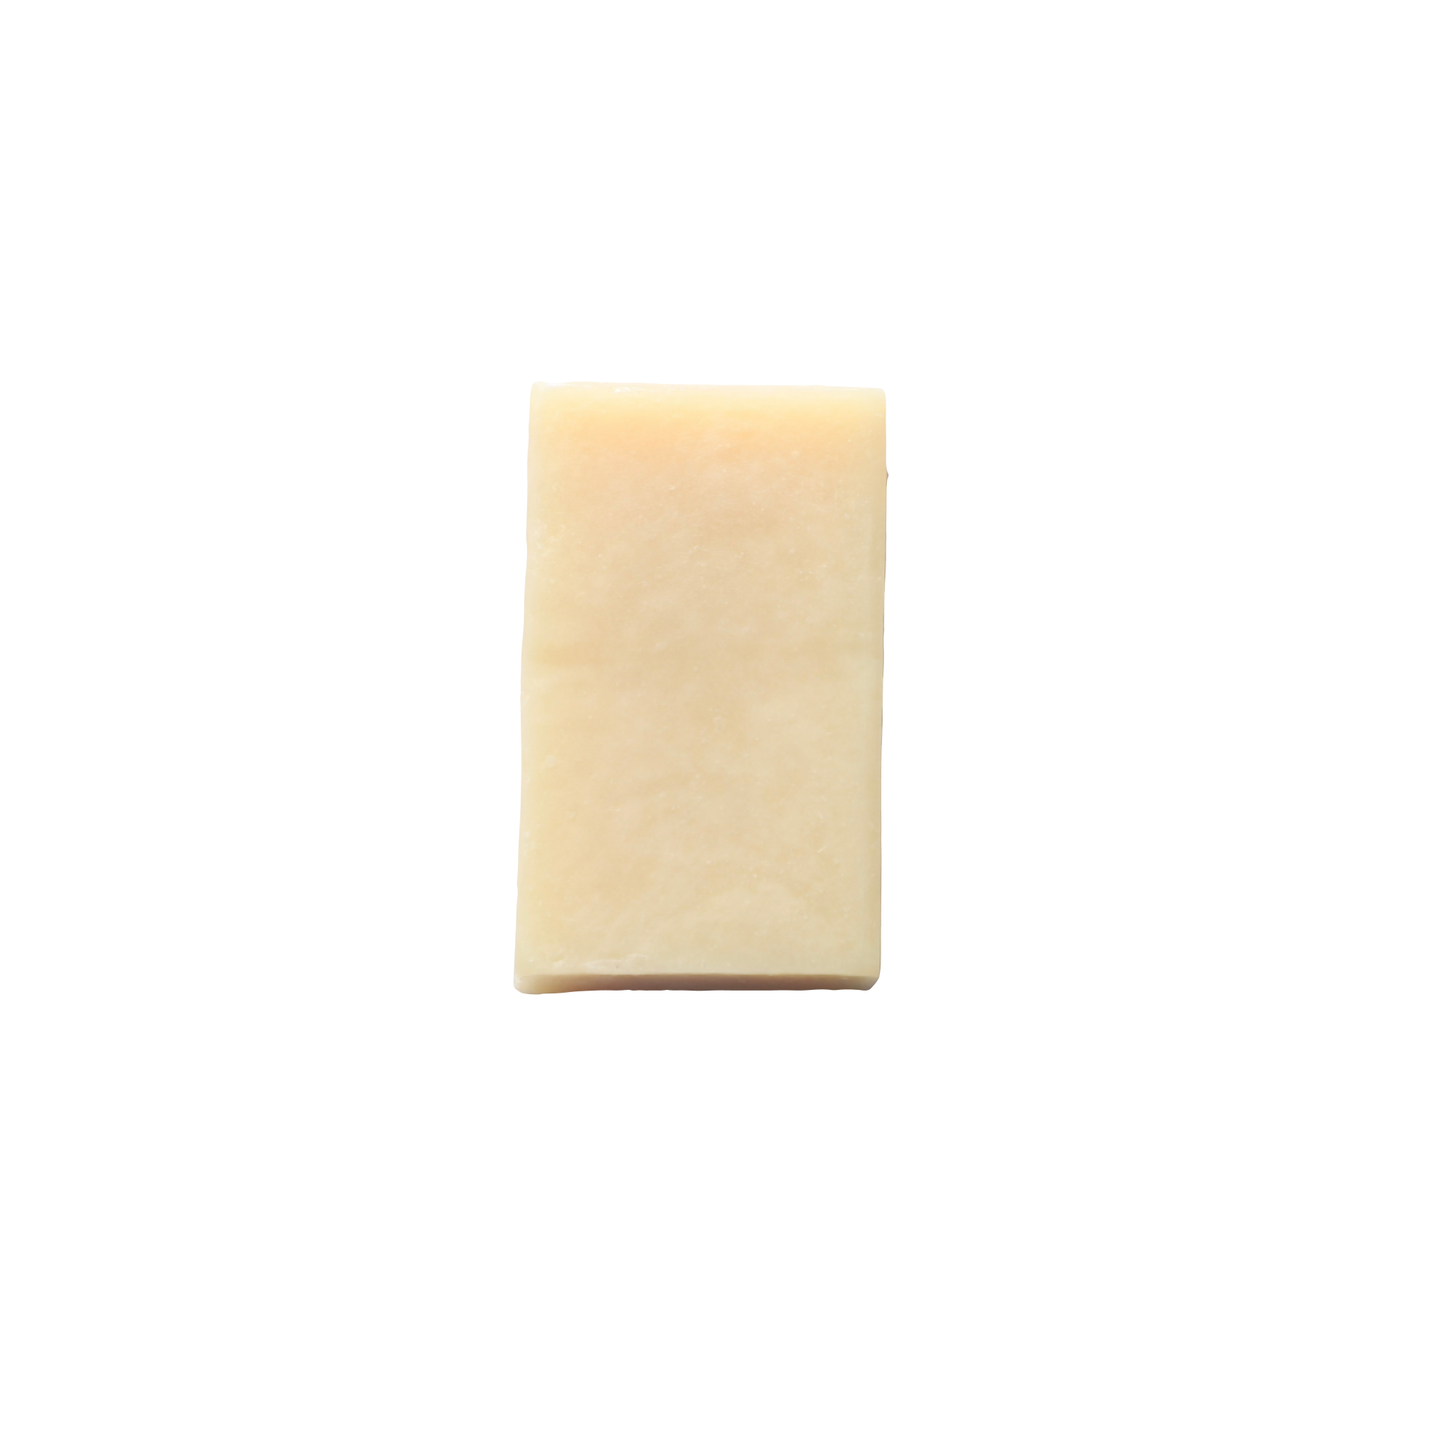 The Cocoa Butter Bar Soap